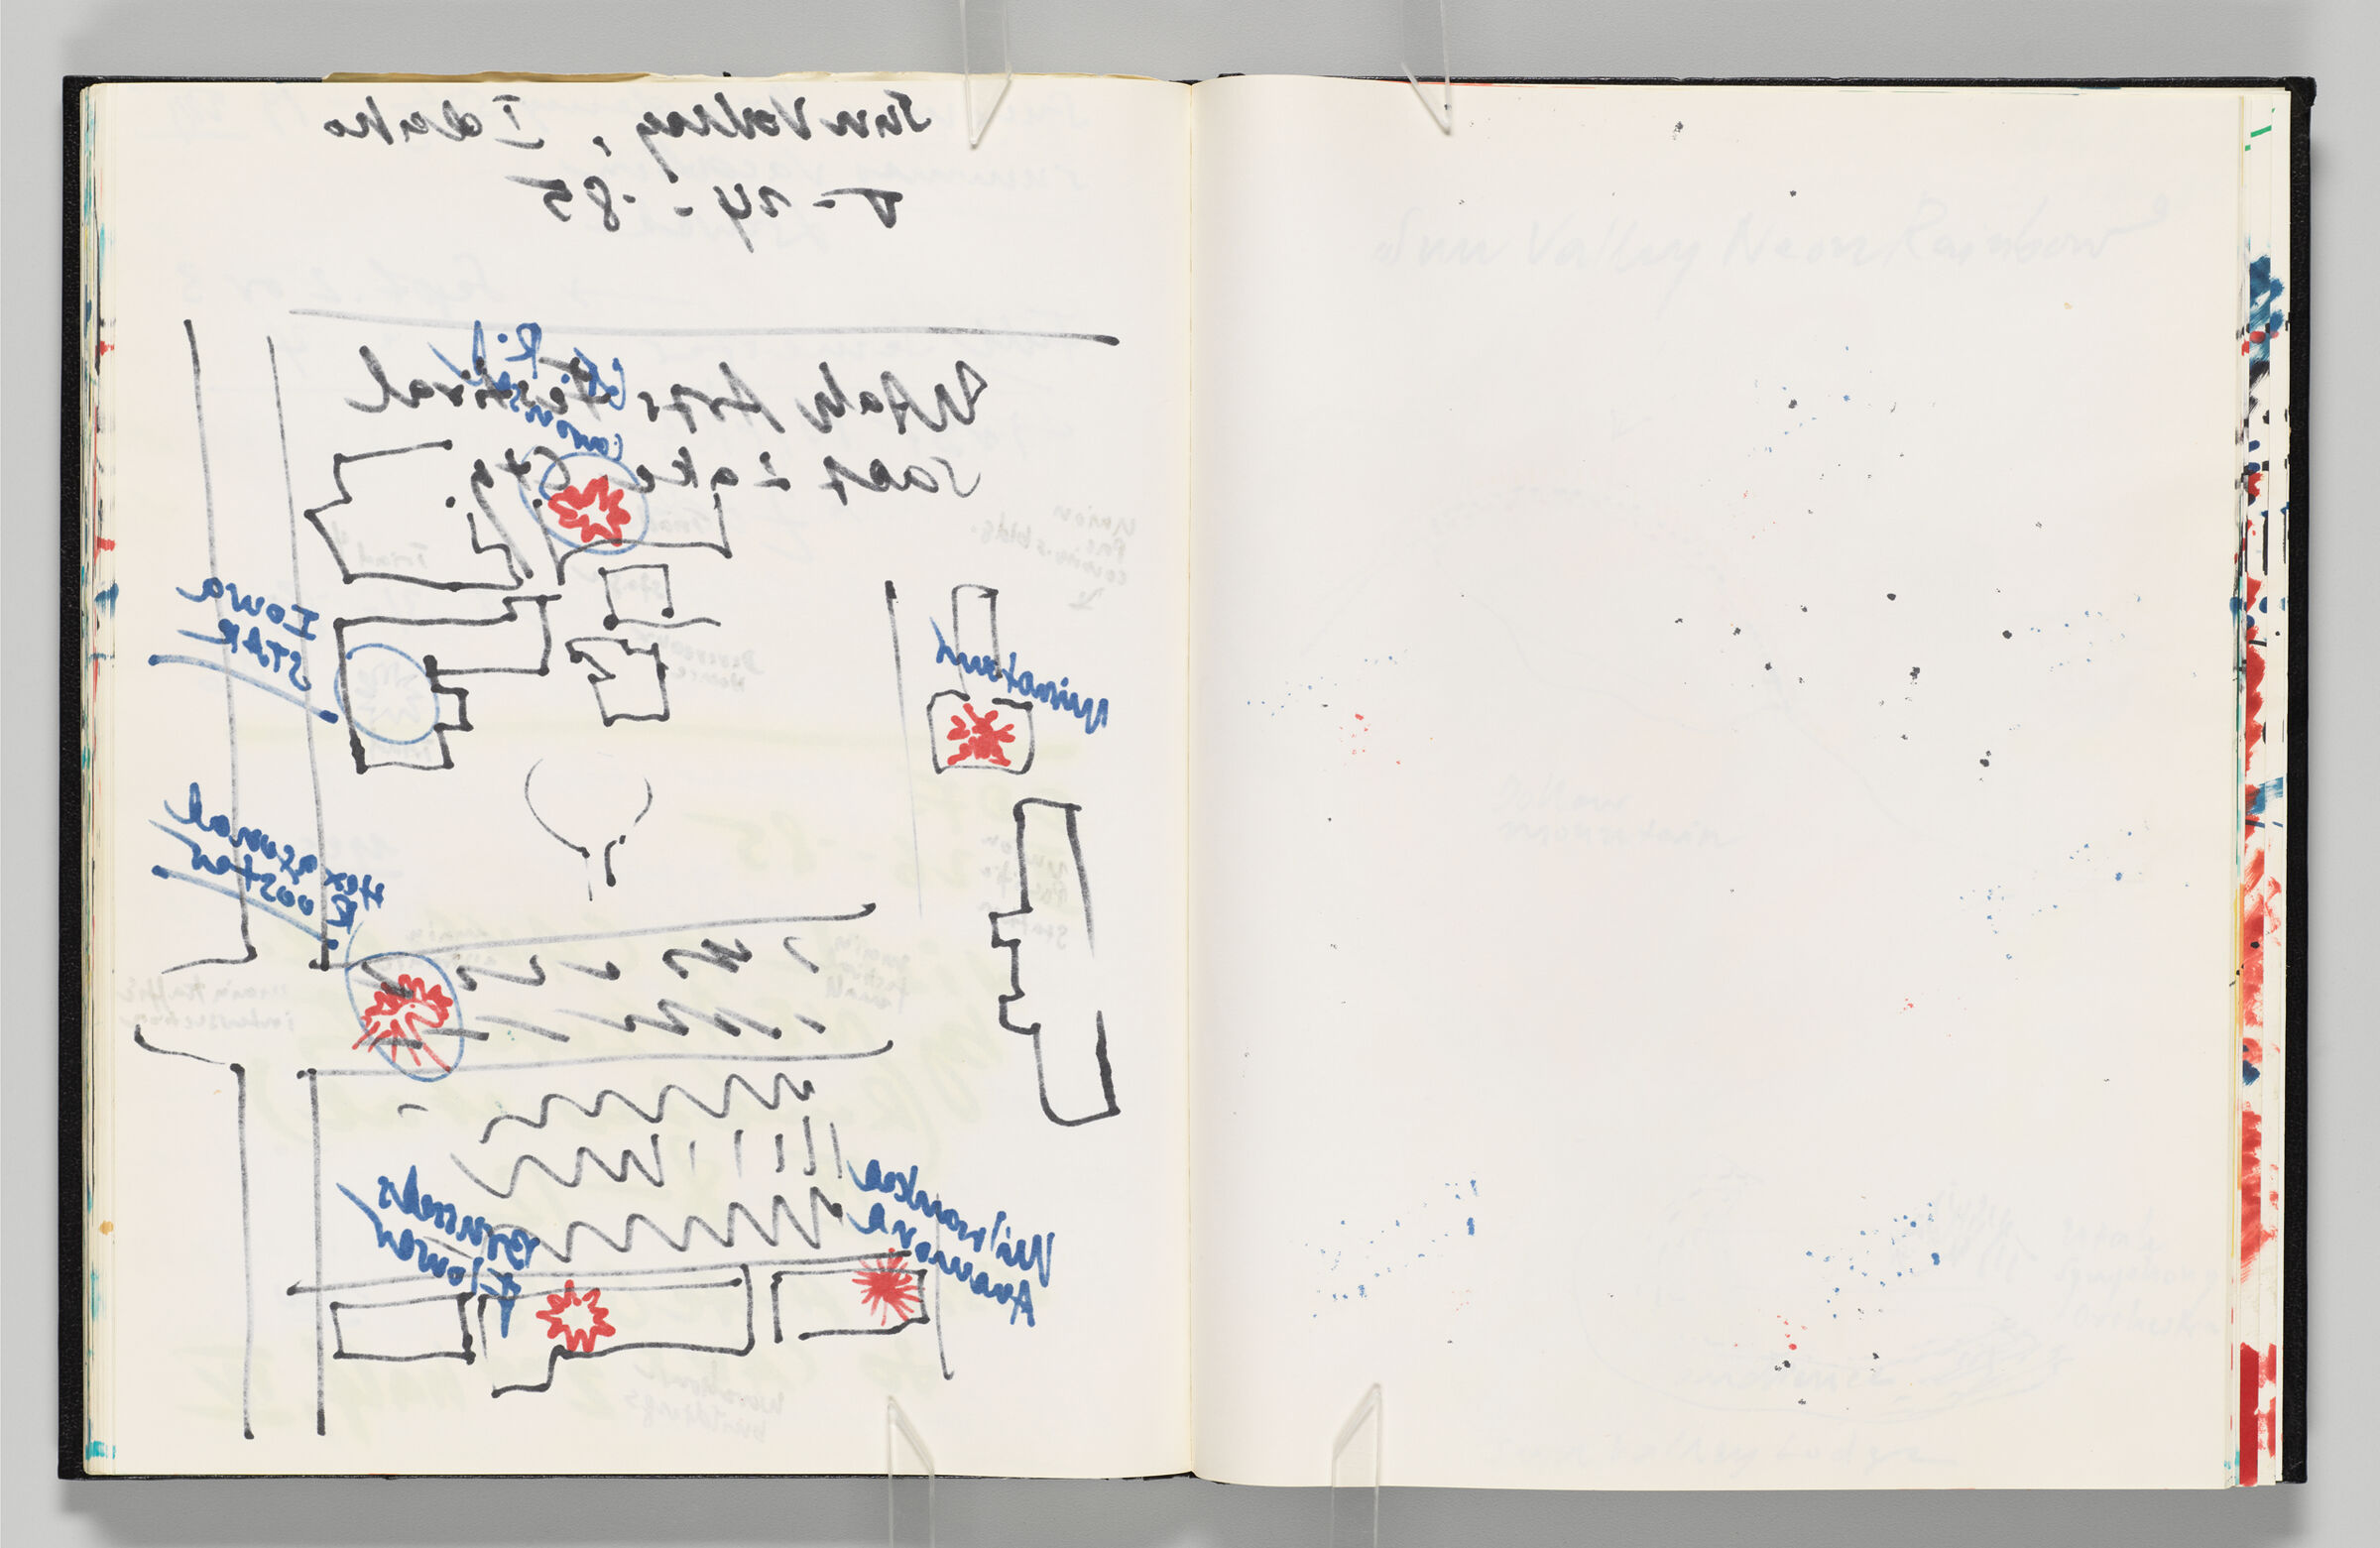 Untitled (Bleed-Through Of Previous Page, Left Page); Untitled (Blank With Slight Color Transfer, Right Page)